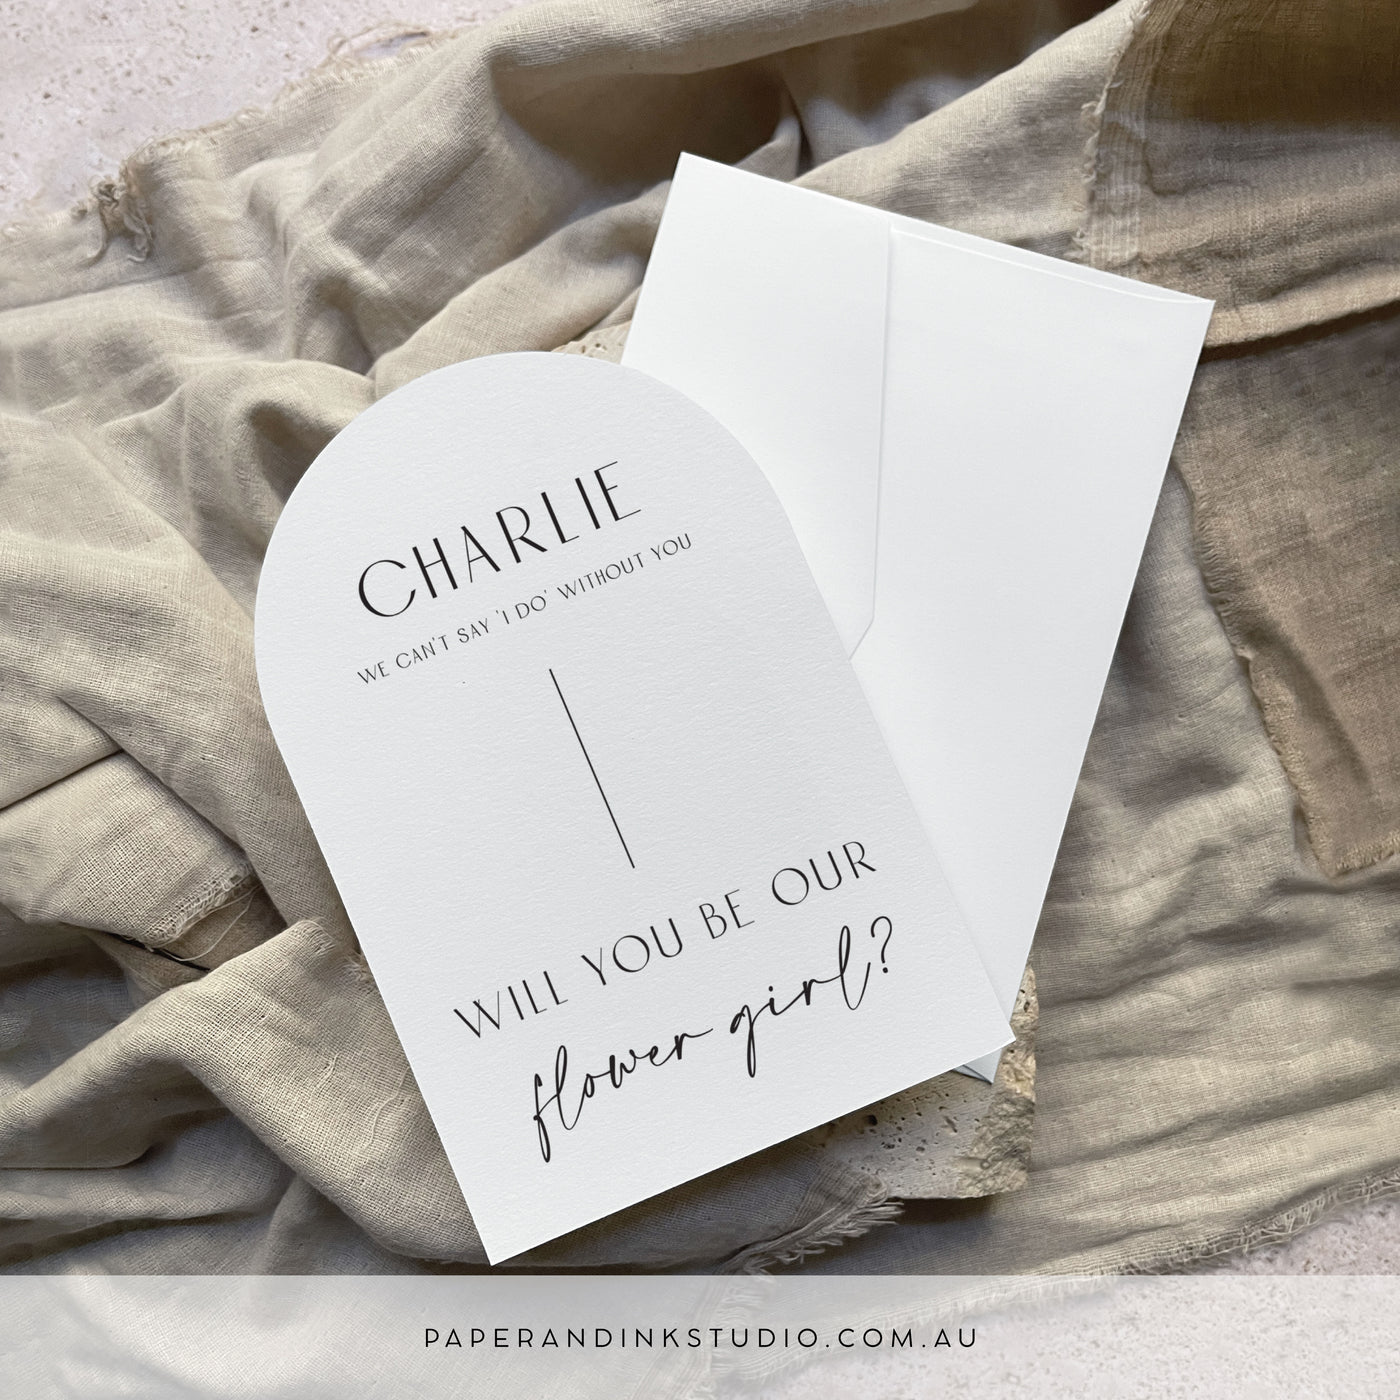 A flat white arch shaped card that can be personalised with the receiver's name, to thank them for being a part of of the couple's wedding party. This one says will you be our flower girl.